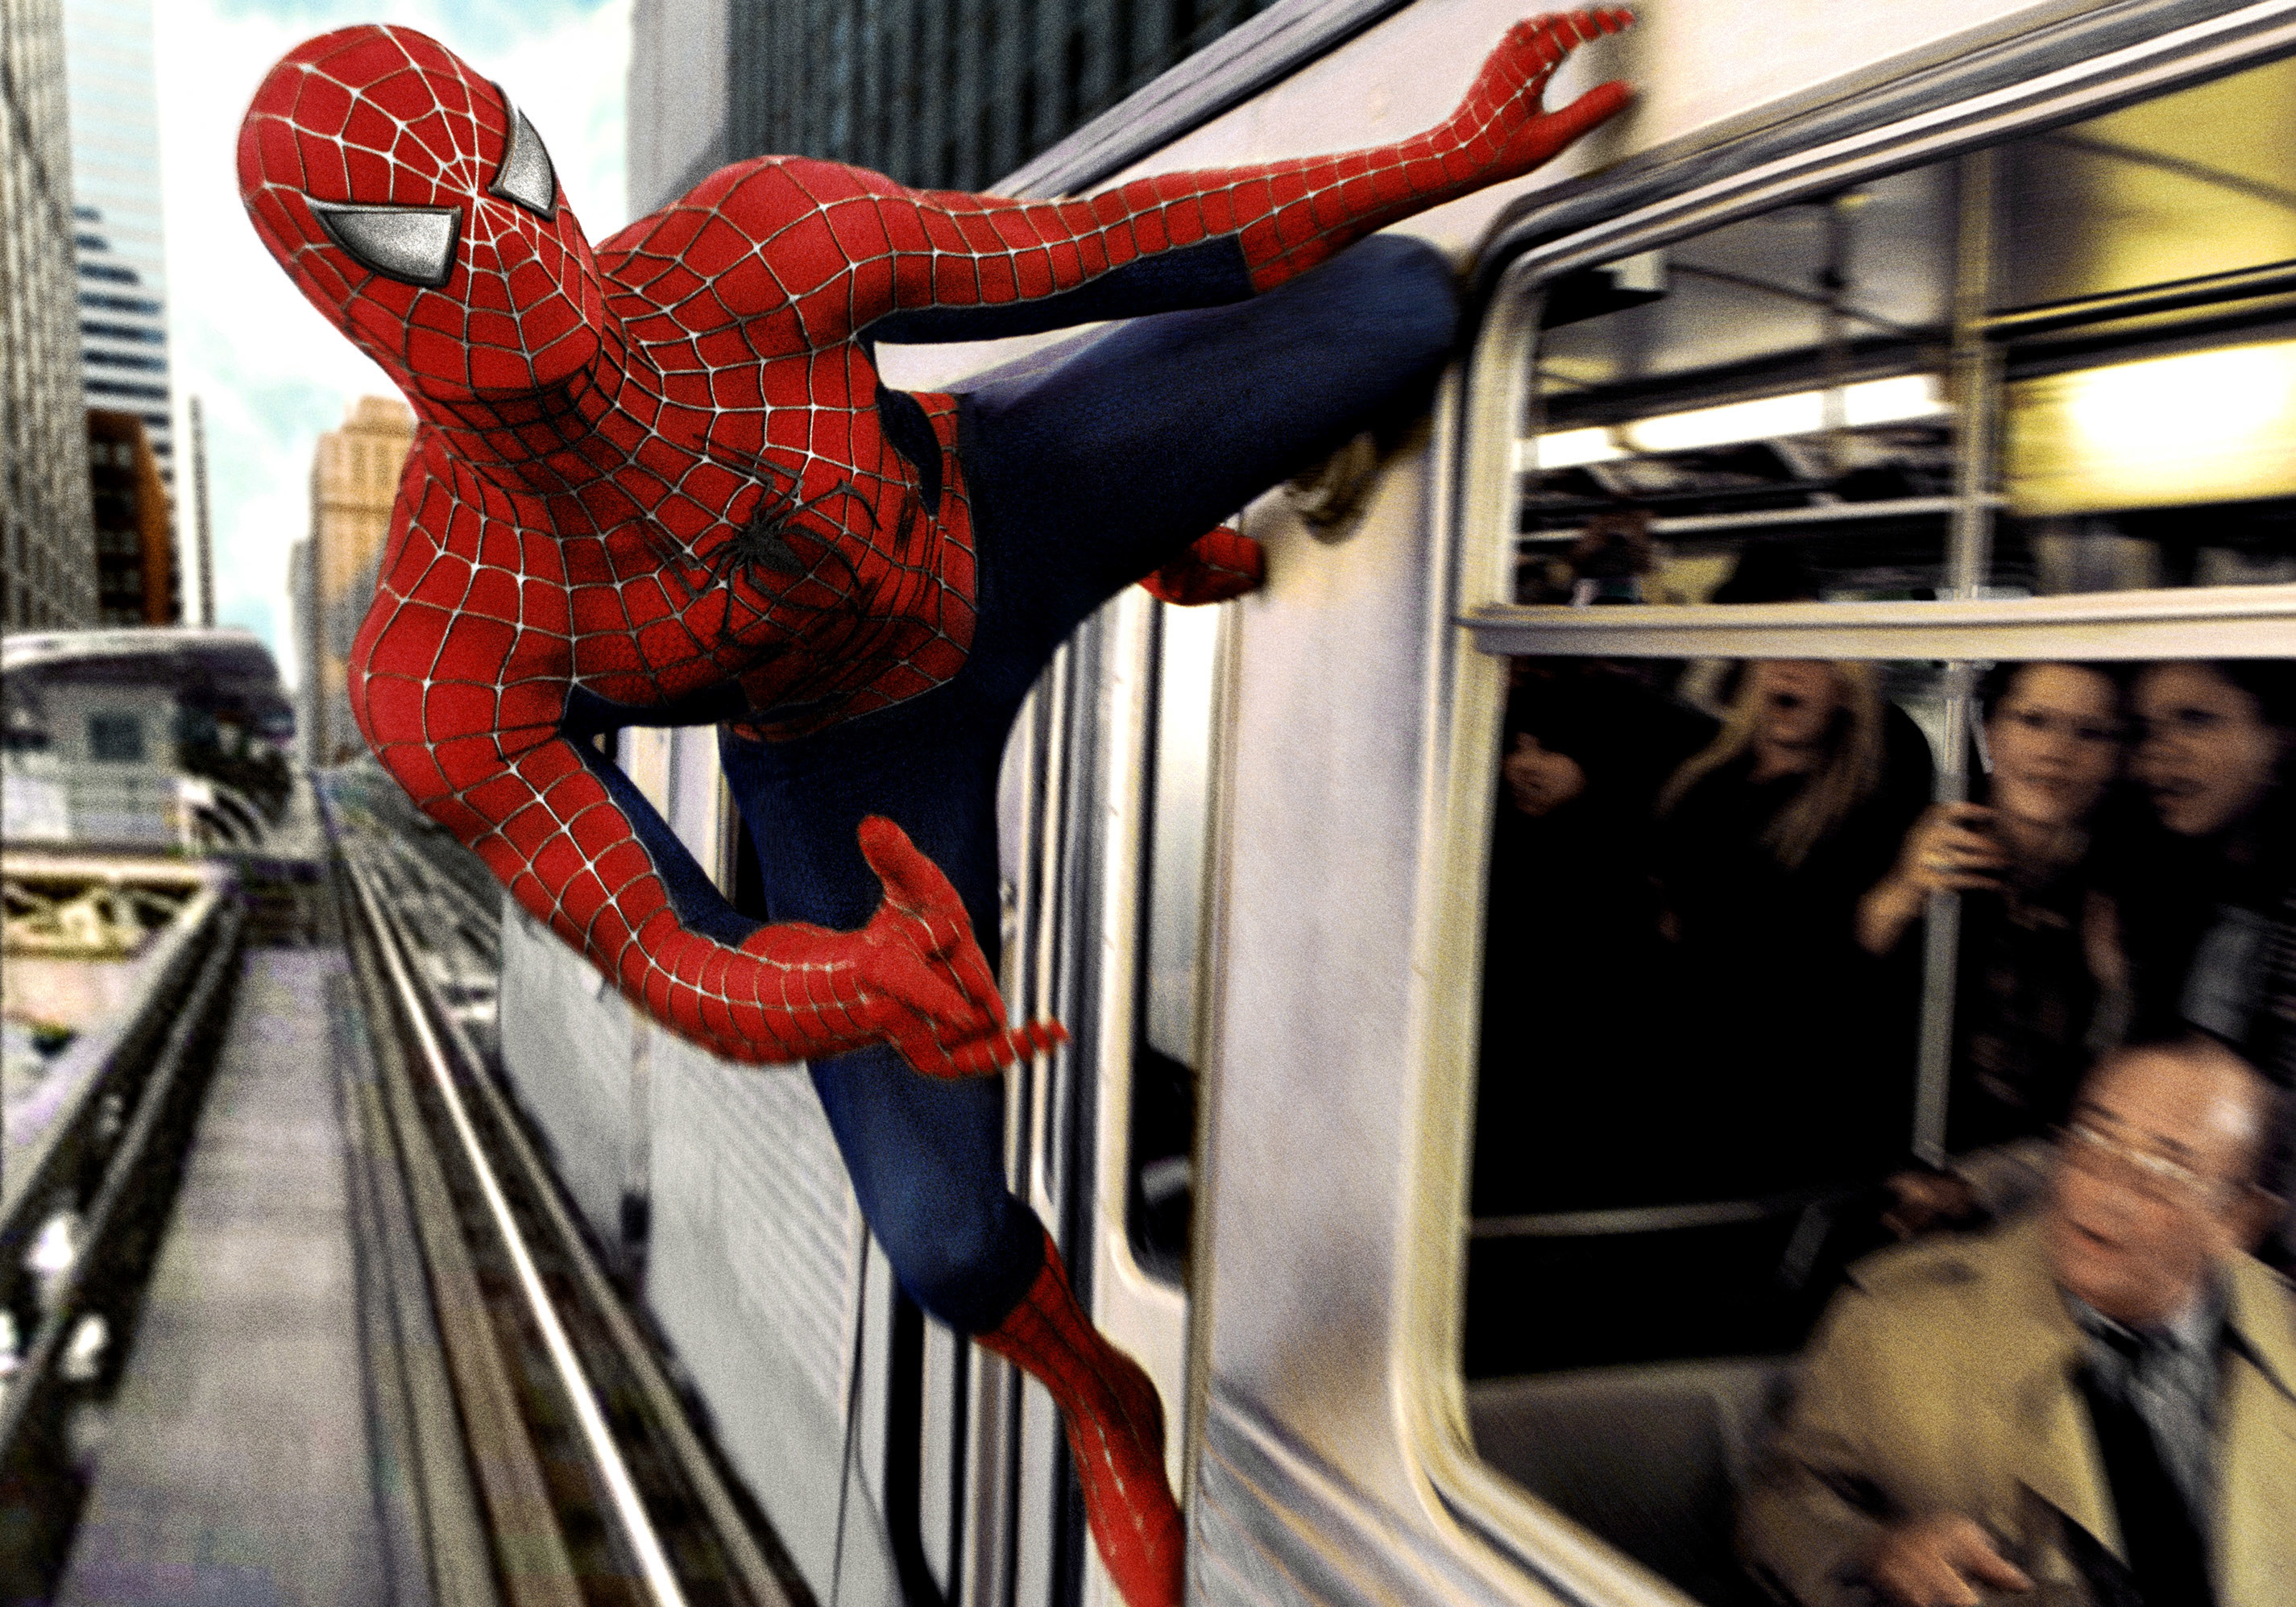 Spidey on the side of a subway train